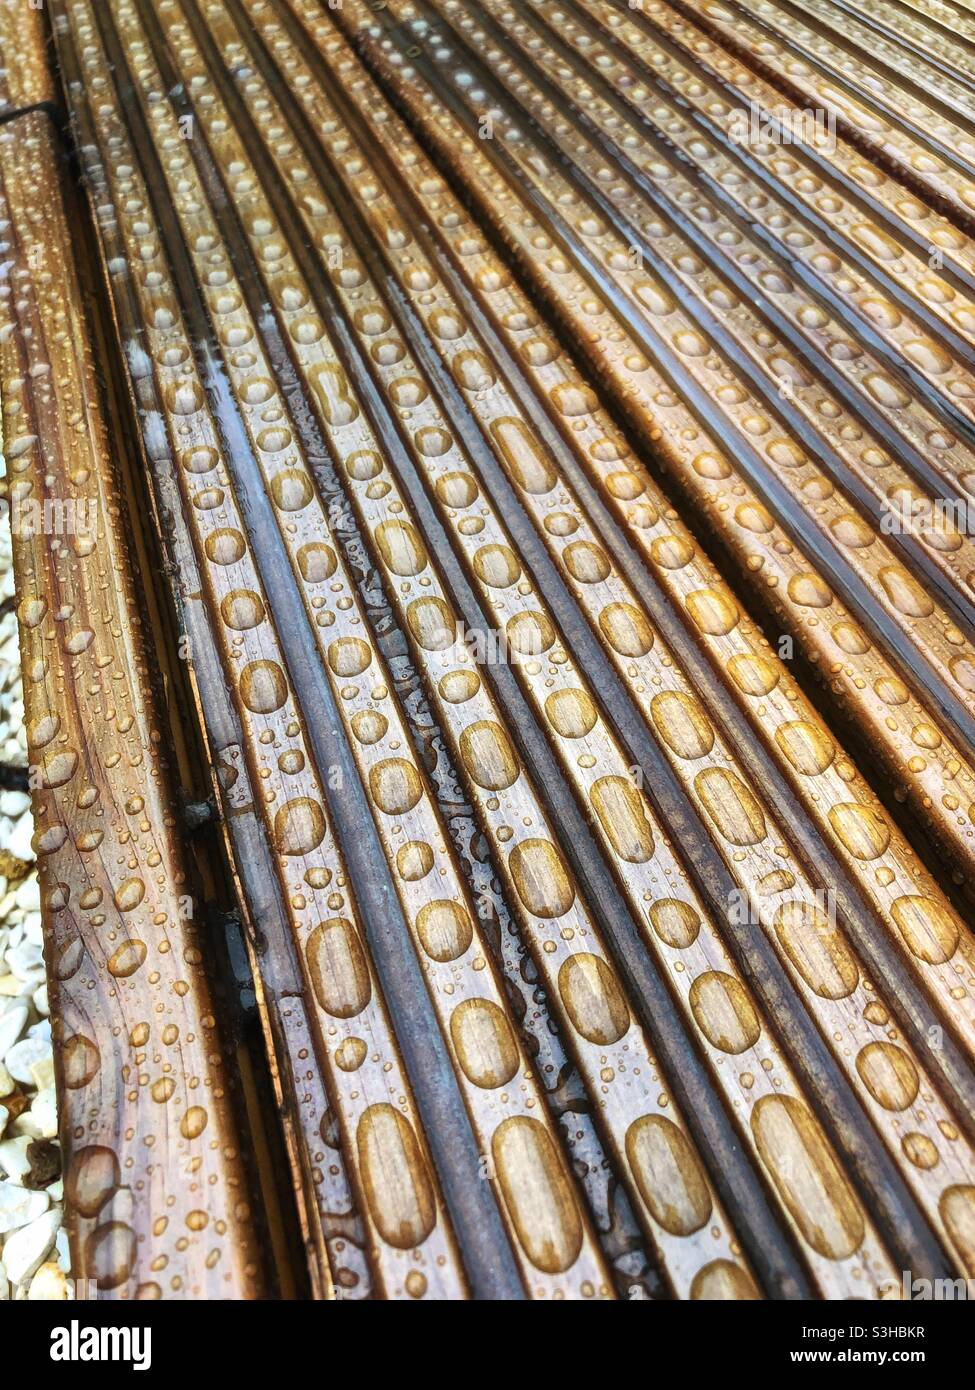 Beads of rainwater on the decking Stock Photo